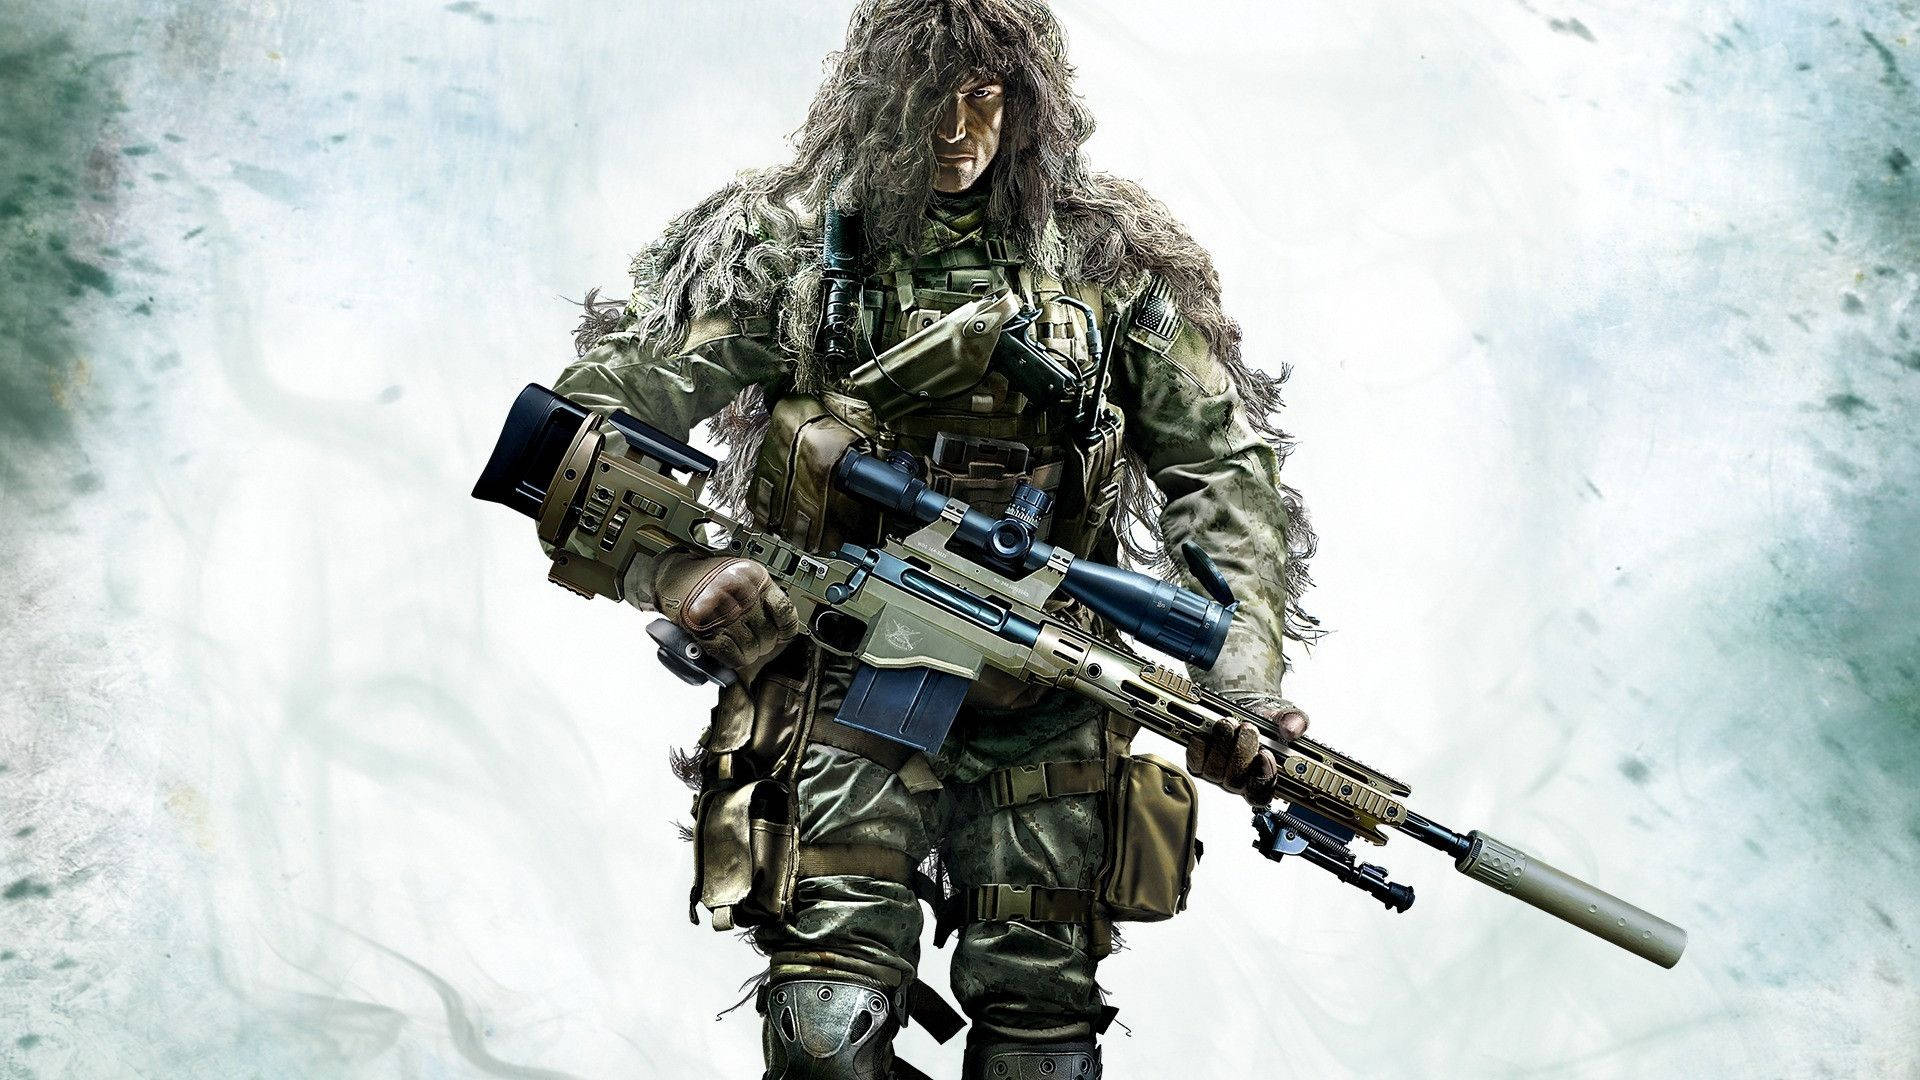 Camouflaged Sniper Soldier In Action Background